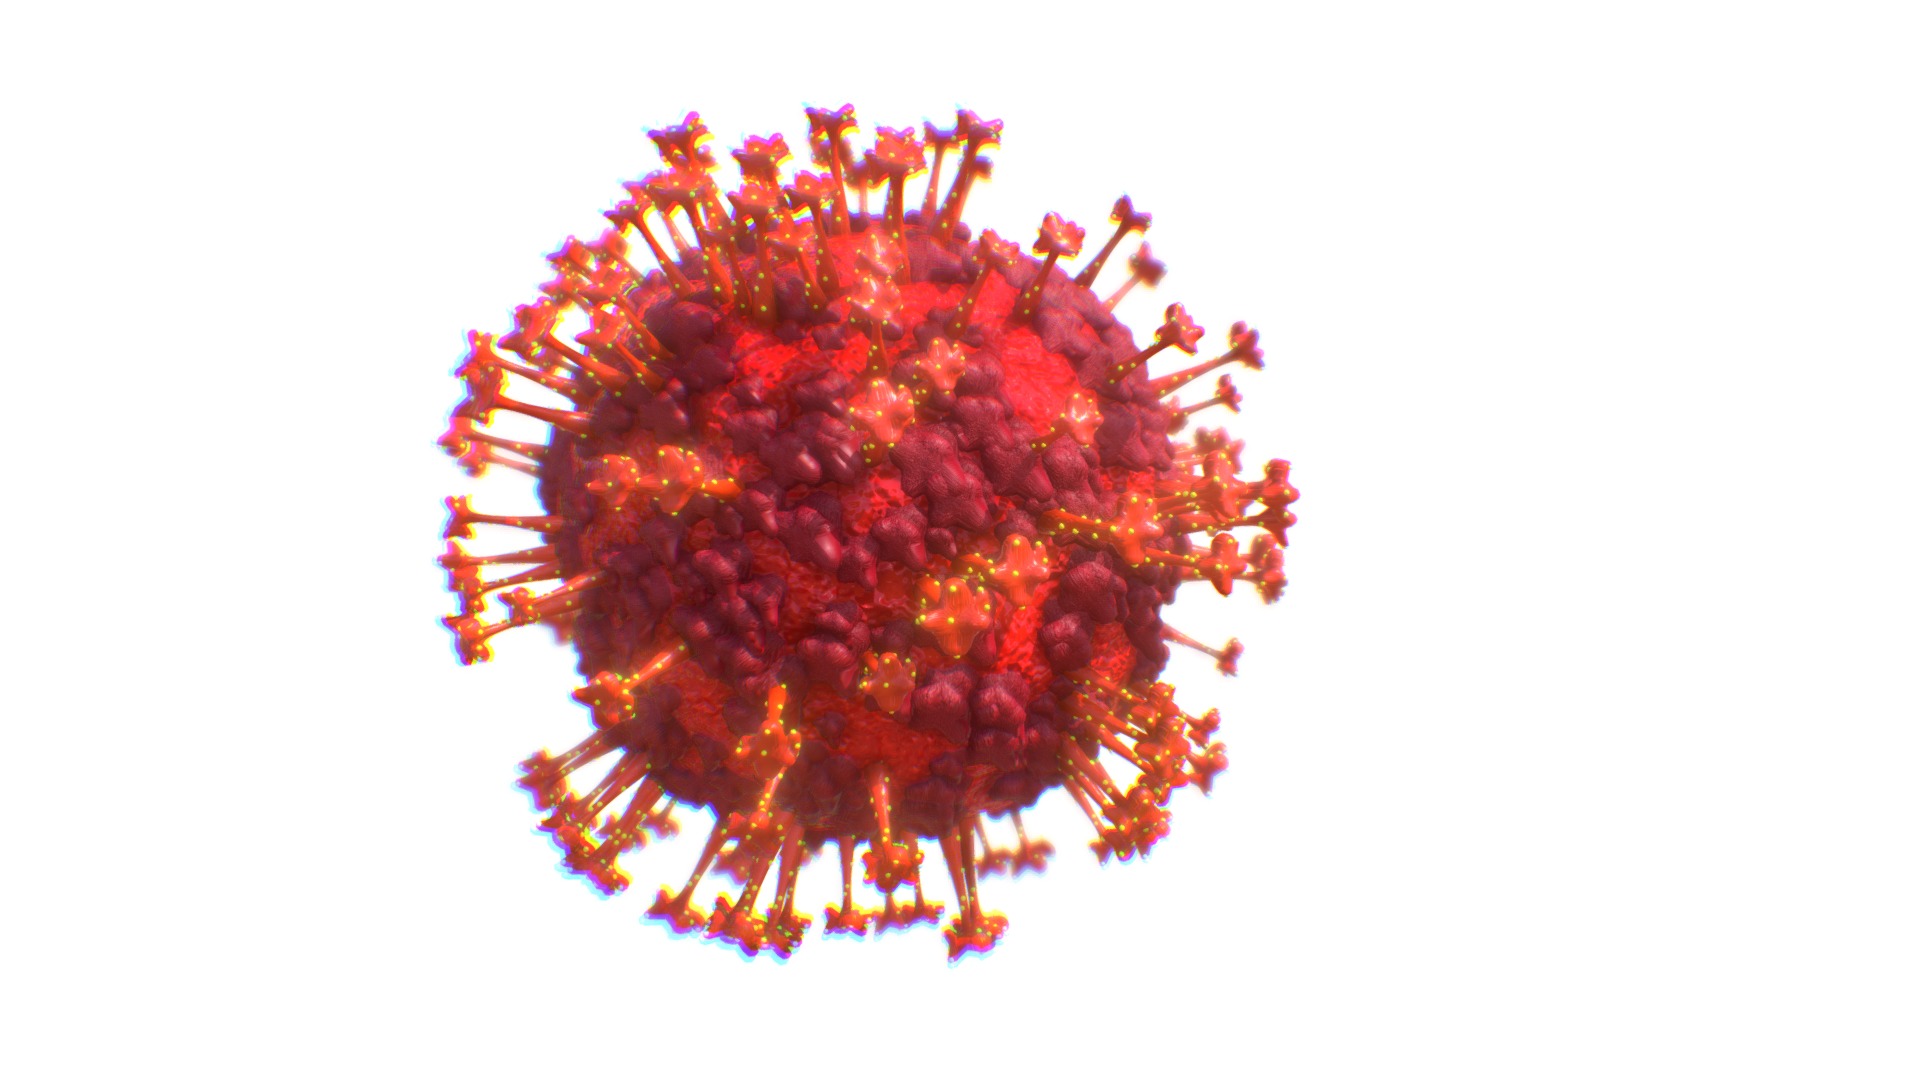 3D model coronavirus - This is a 3D model of the coronavirus. The 3D model is about a red and orange explosion.